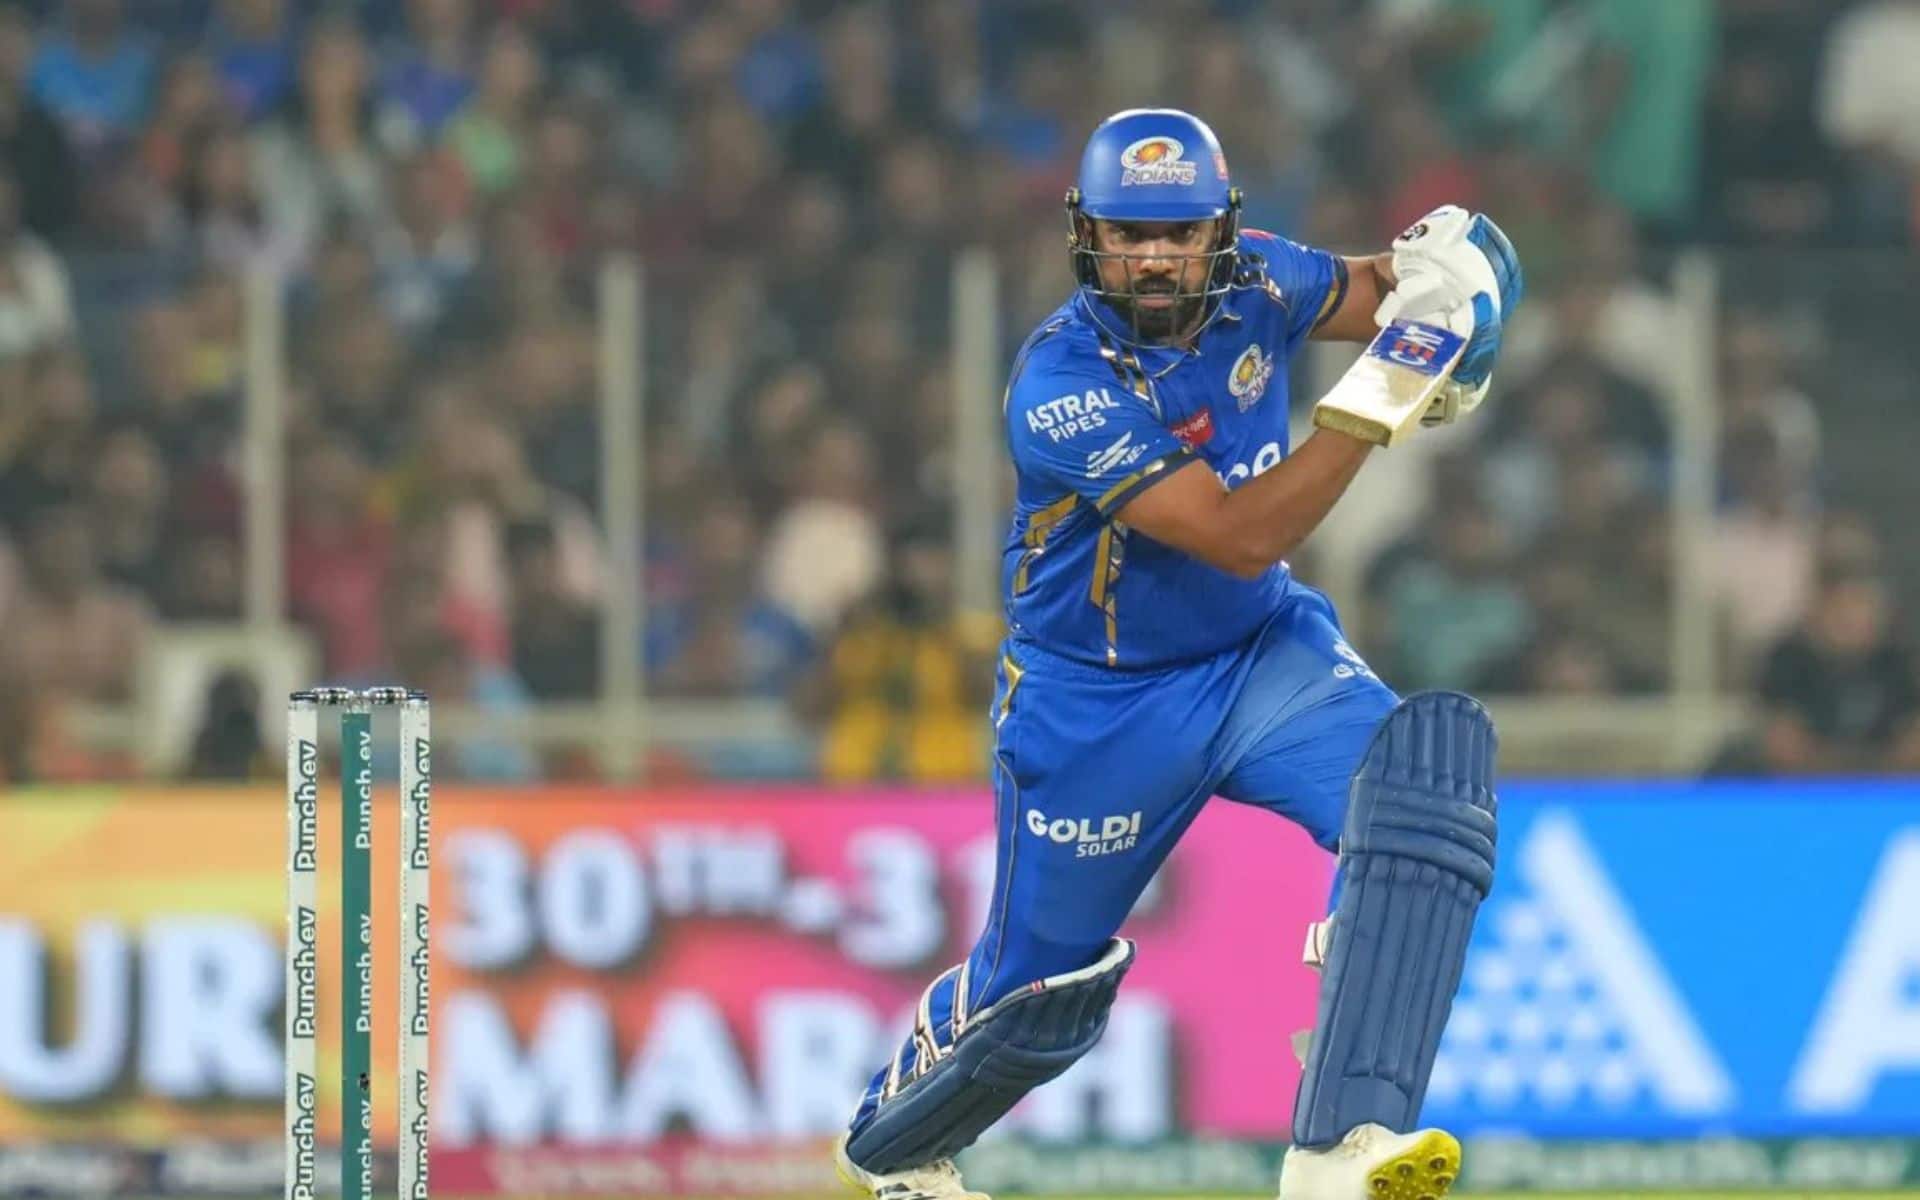 Rohit Sharma has the fifth most sixes in 20th over in the IPL (X.com)